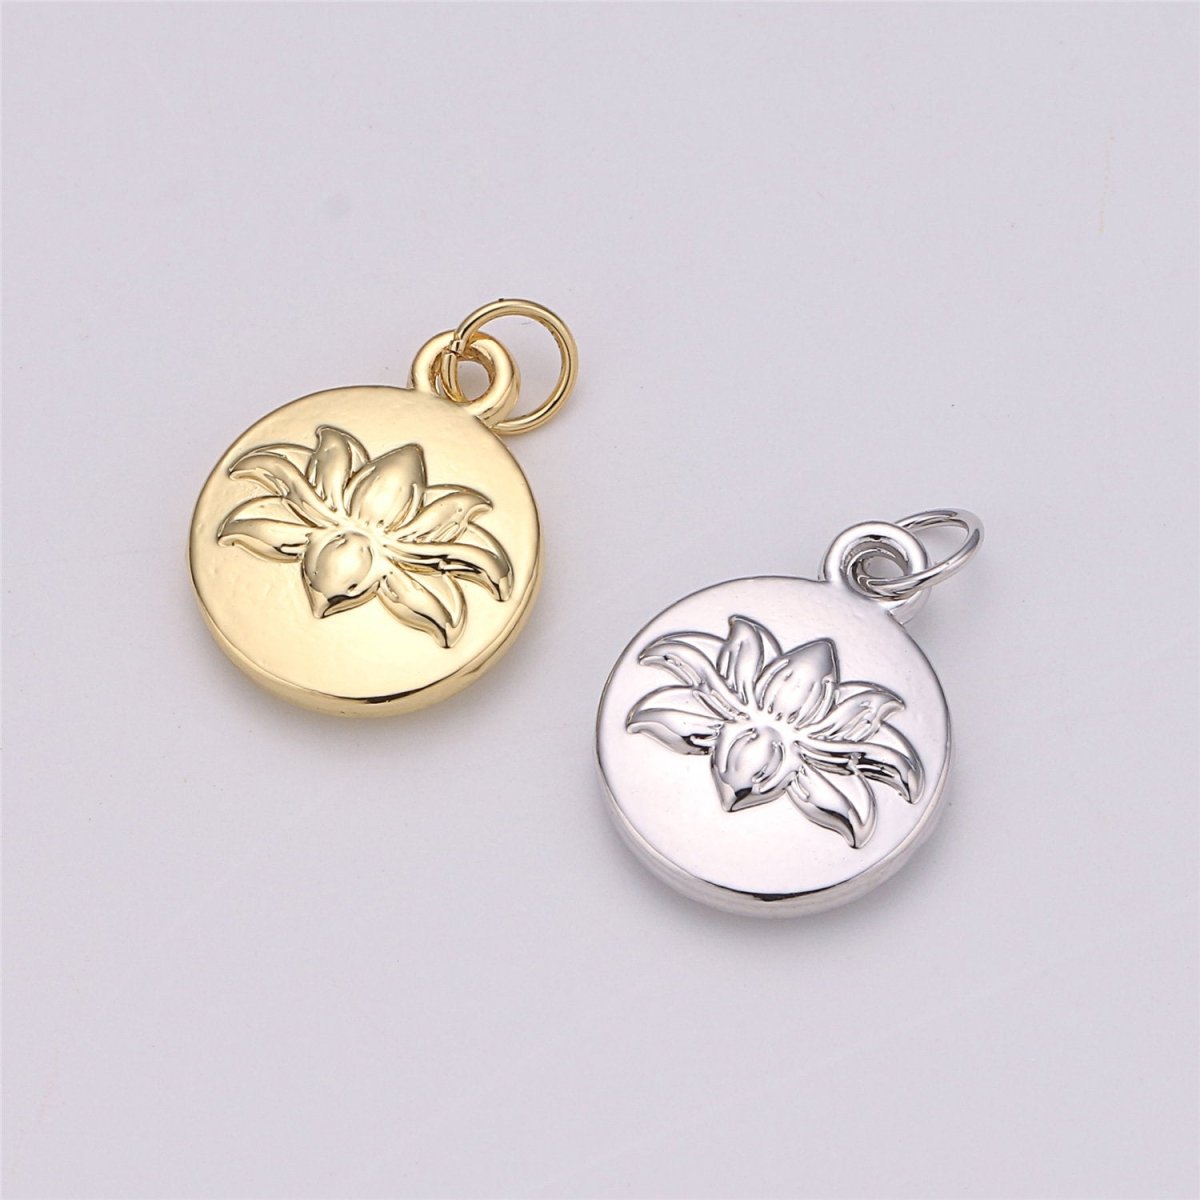 18k Gold Filled Lotus Charm, Gold Lotus Pendant, Dainty Lotus Charm, Gold Lotus Charm Lotus Flower Disc Coin Charms C-299 - DLUXCA